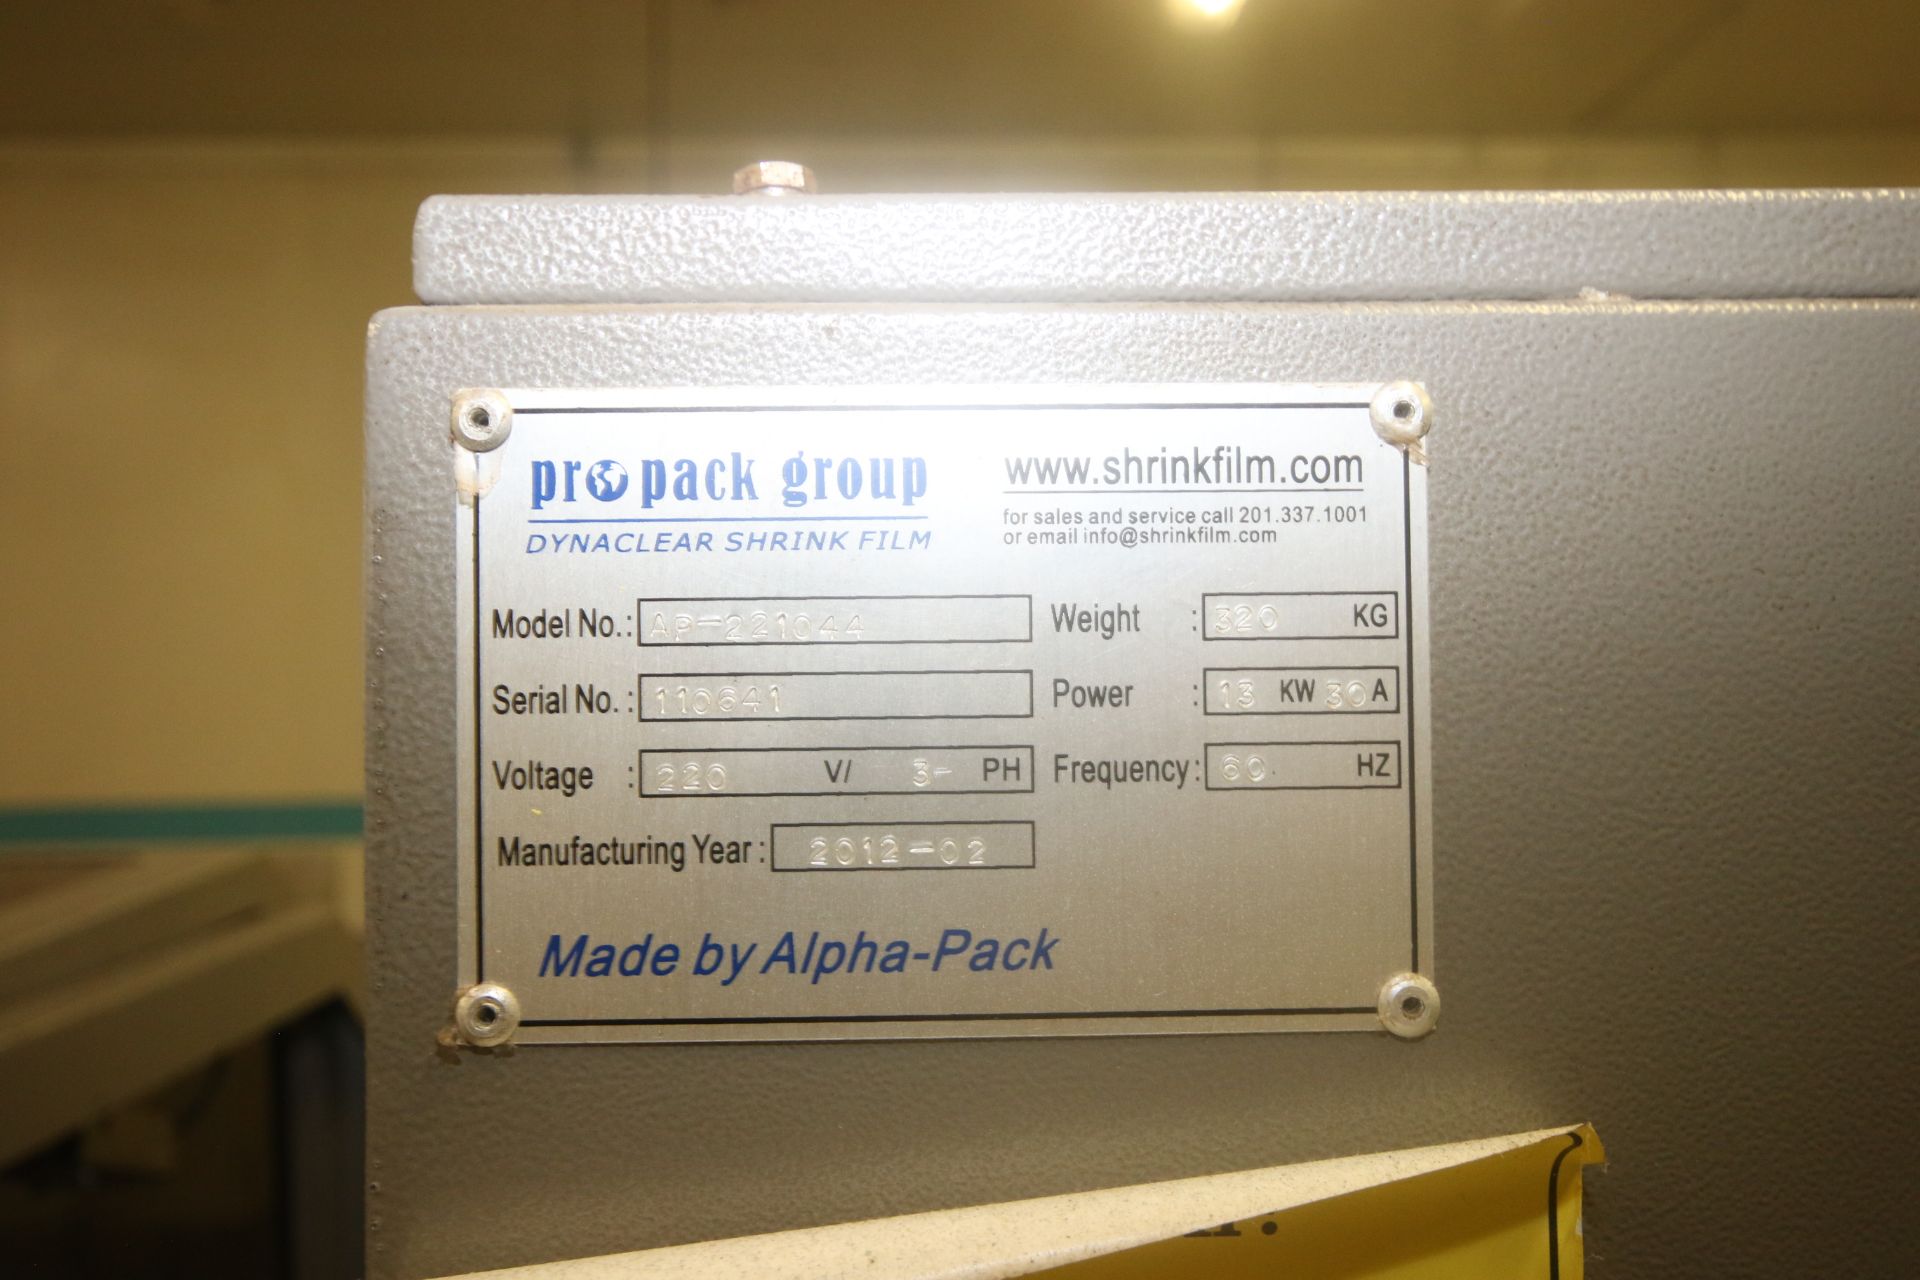 2012 Alpha-Pack/ProPack Group Shrink Tunnel, M/N AP-221044, S/N 110641, 220 Volts, 3 Phase, Weight - Image 3 of 4